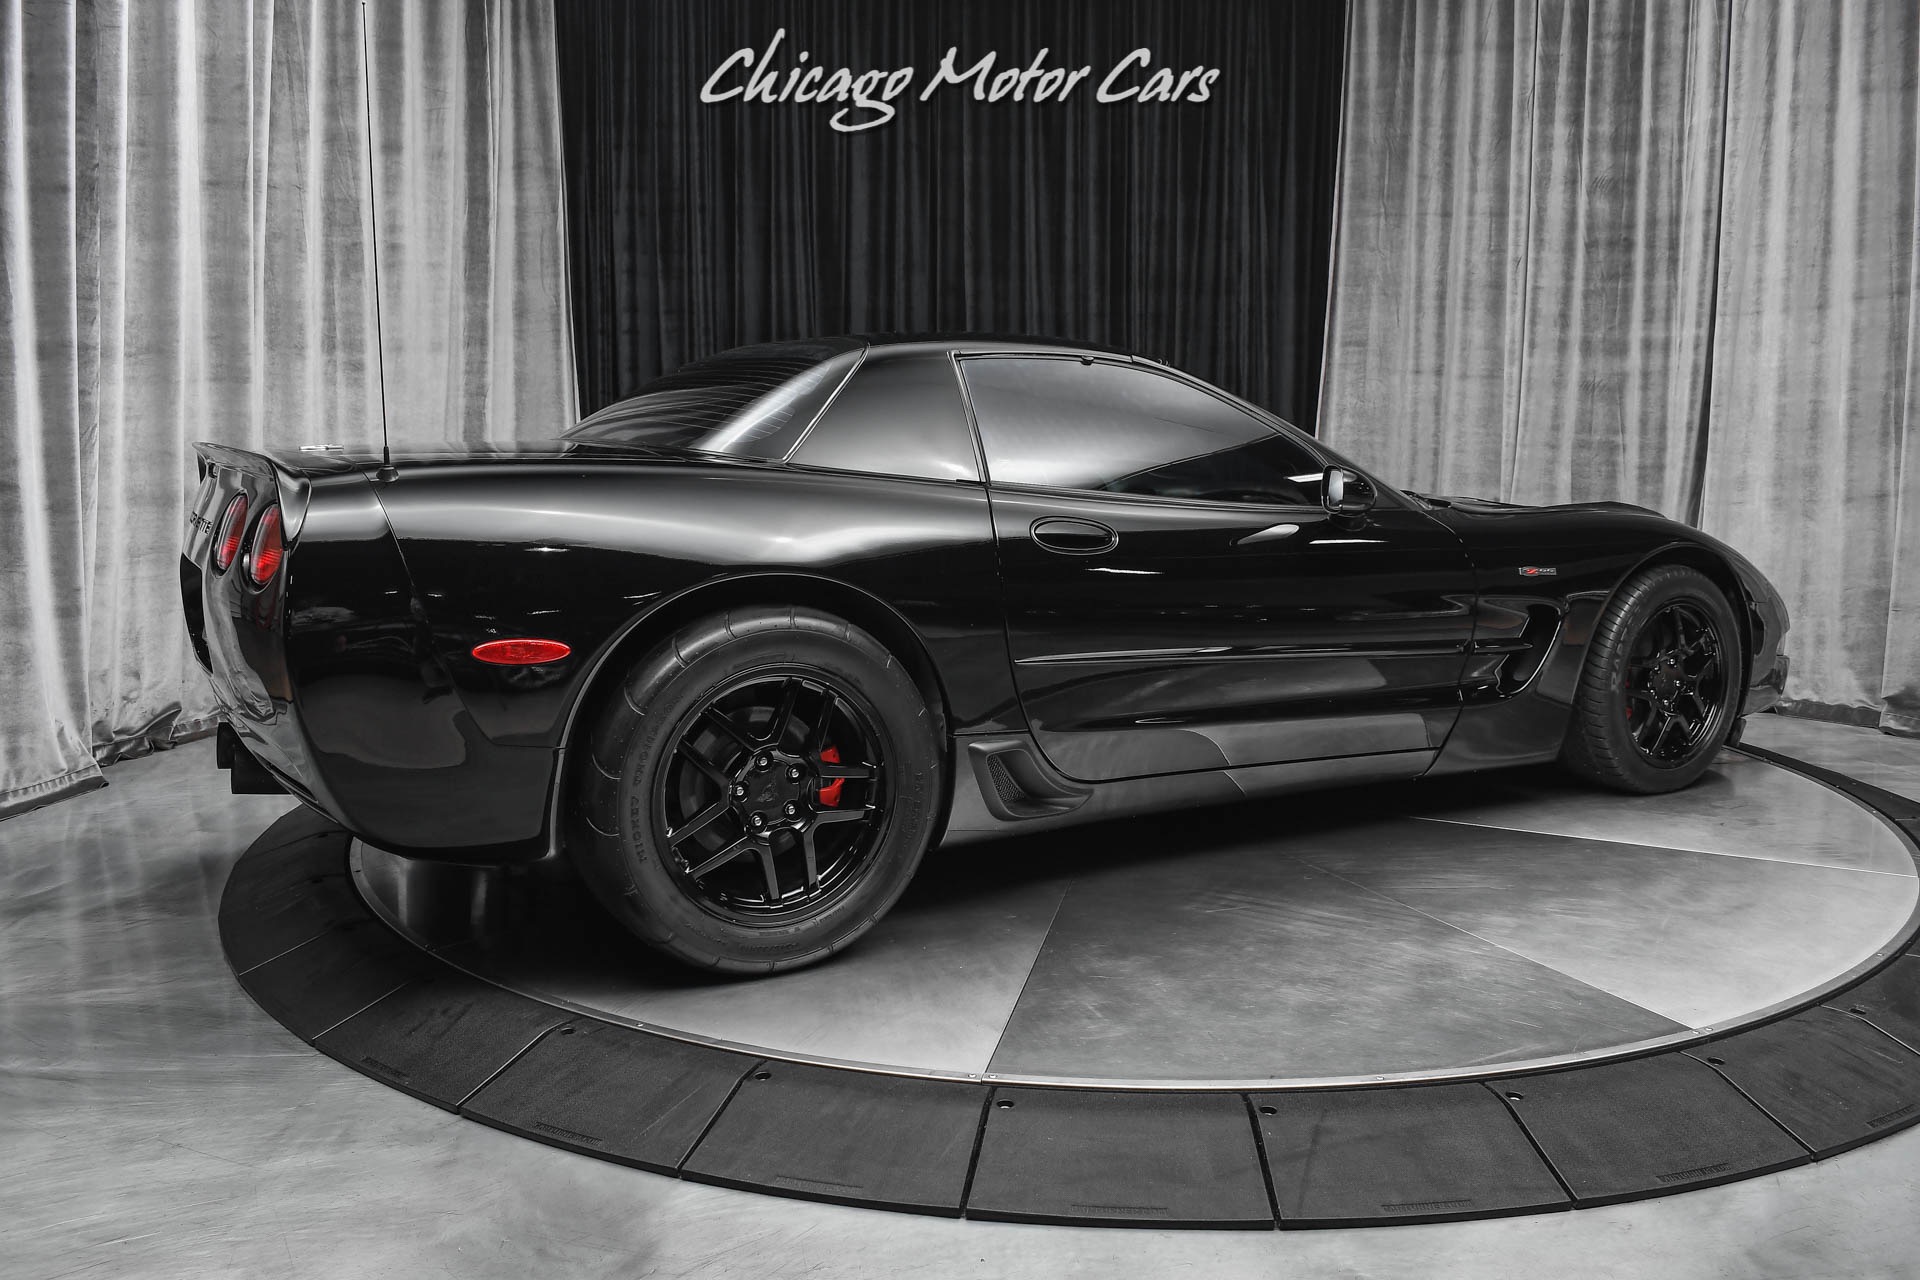 Used-2003-Chevrolet-Corvette-Z06-PROCHARGED-545RWHP-LOW-MILES